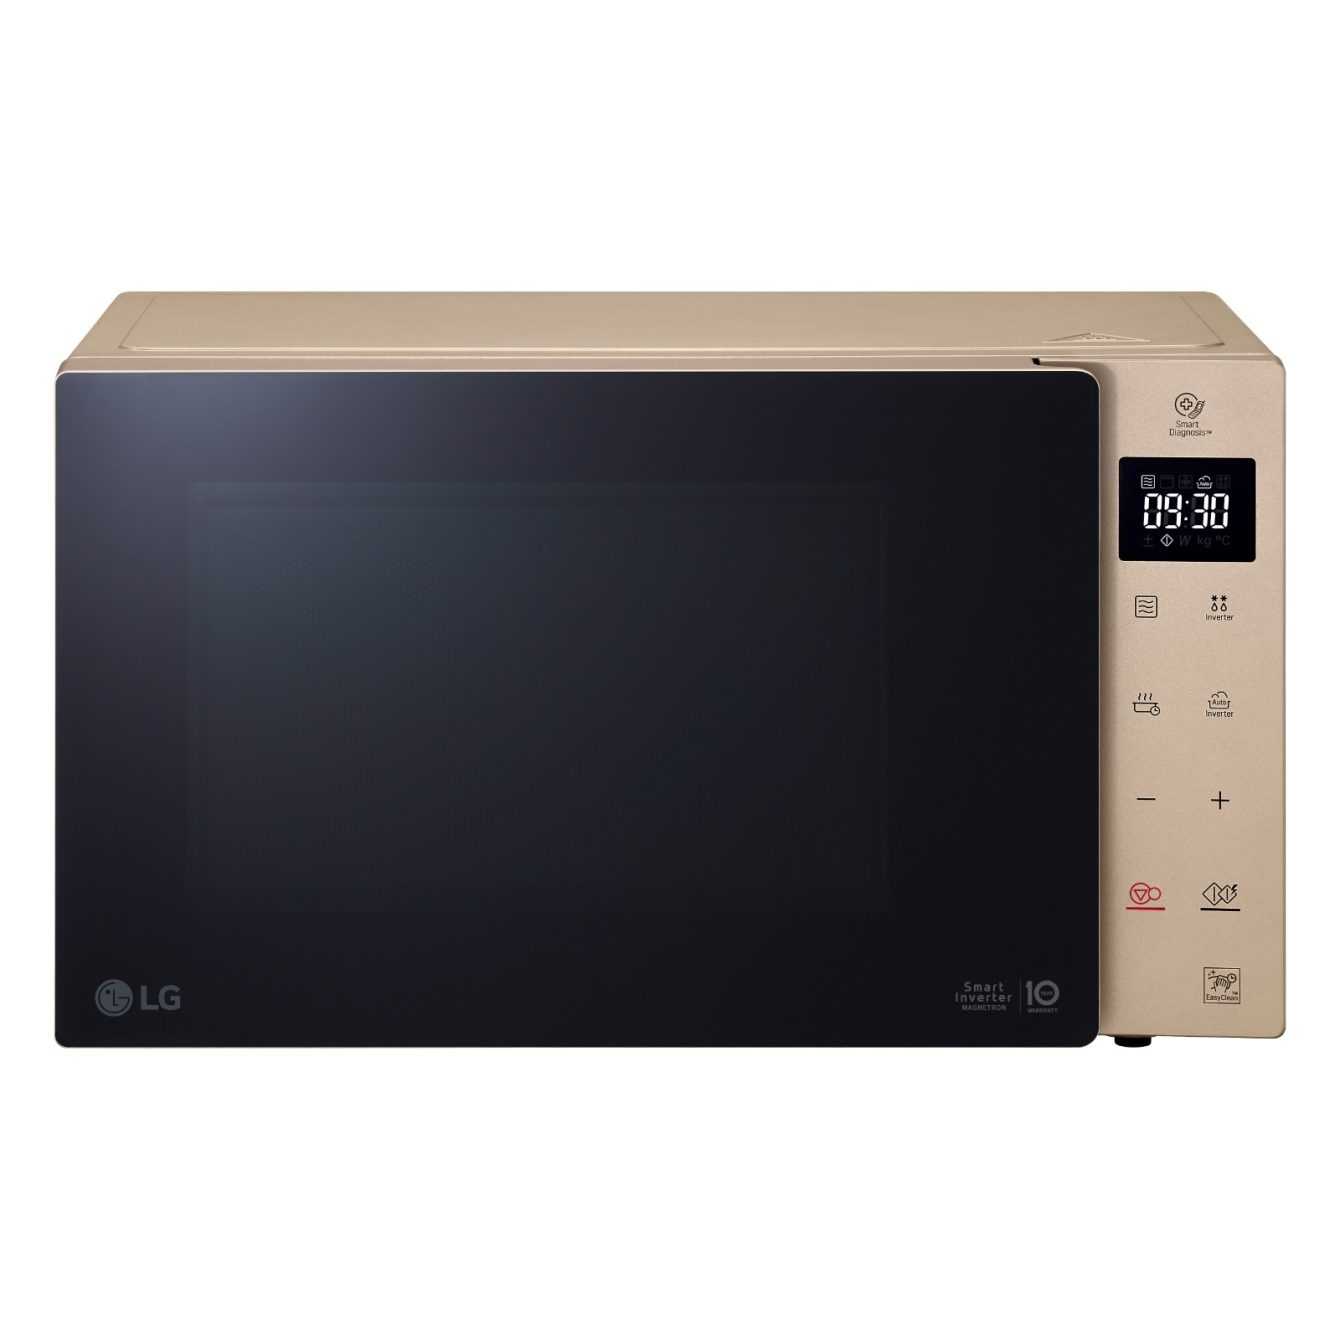 LG NeoChef: the new golden addition to the microwave range